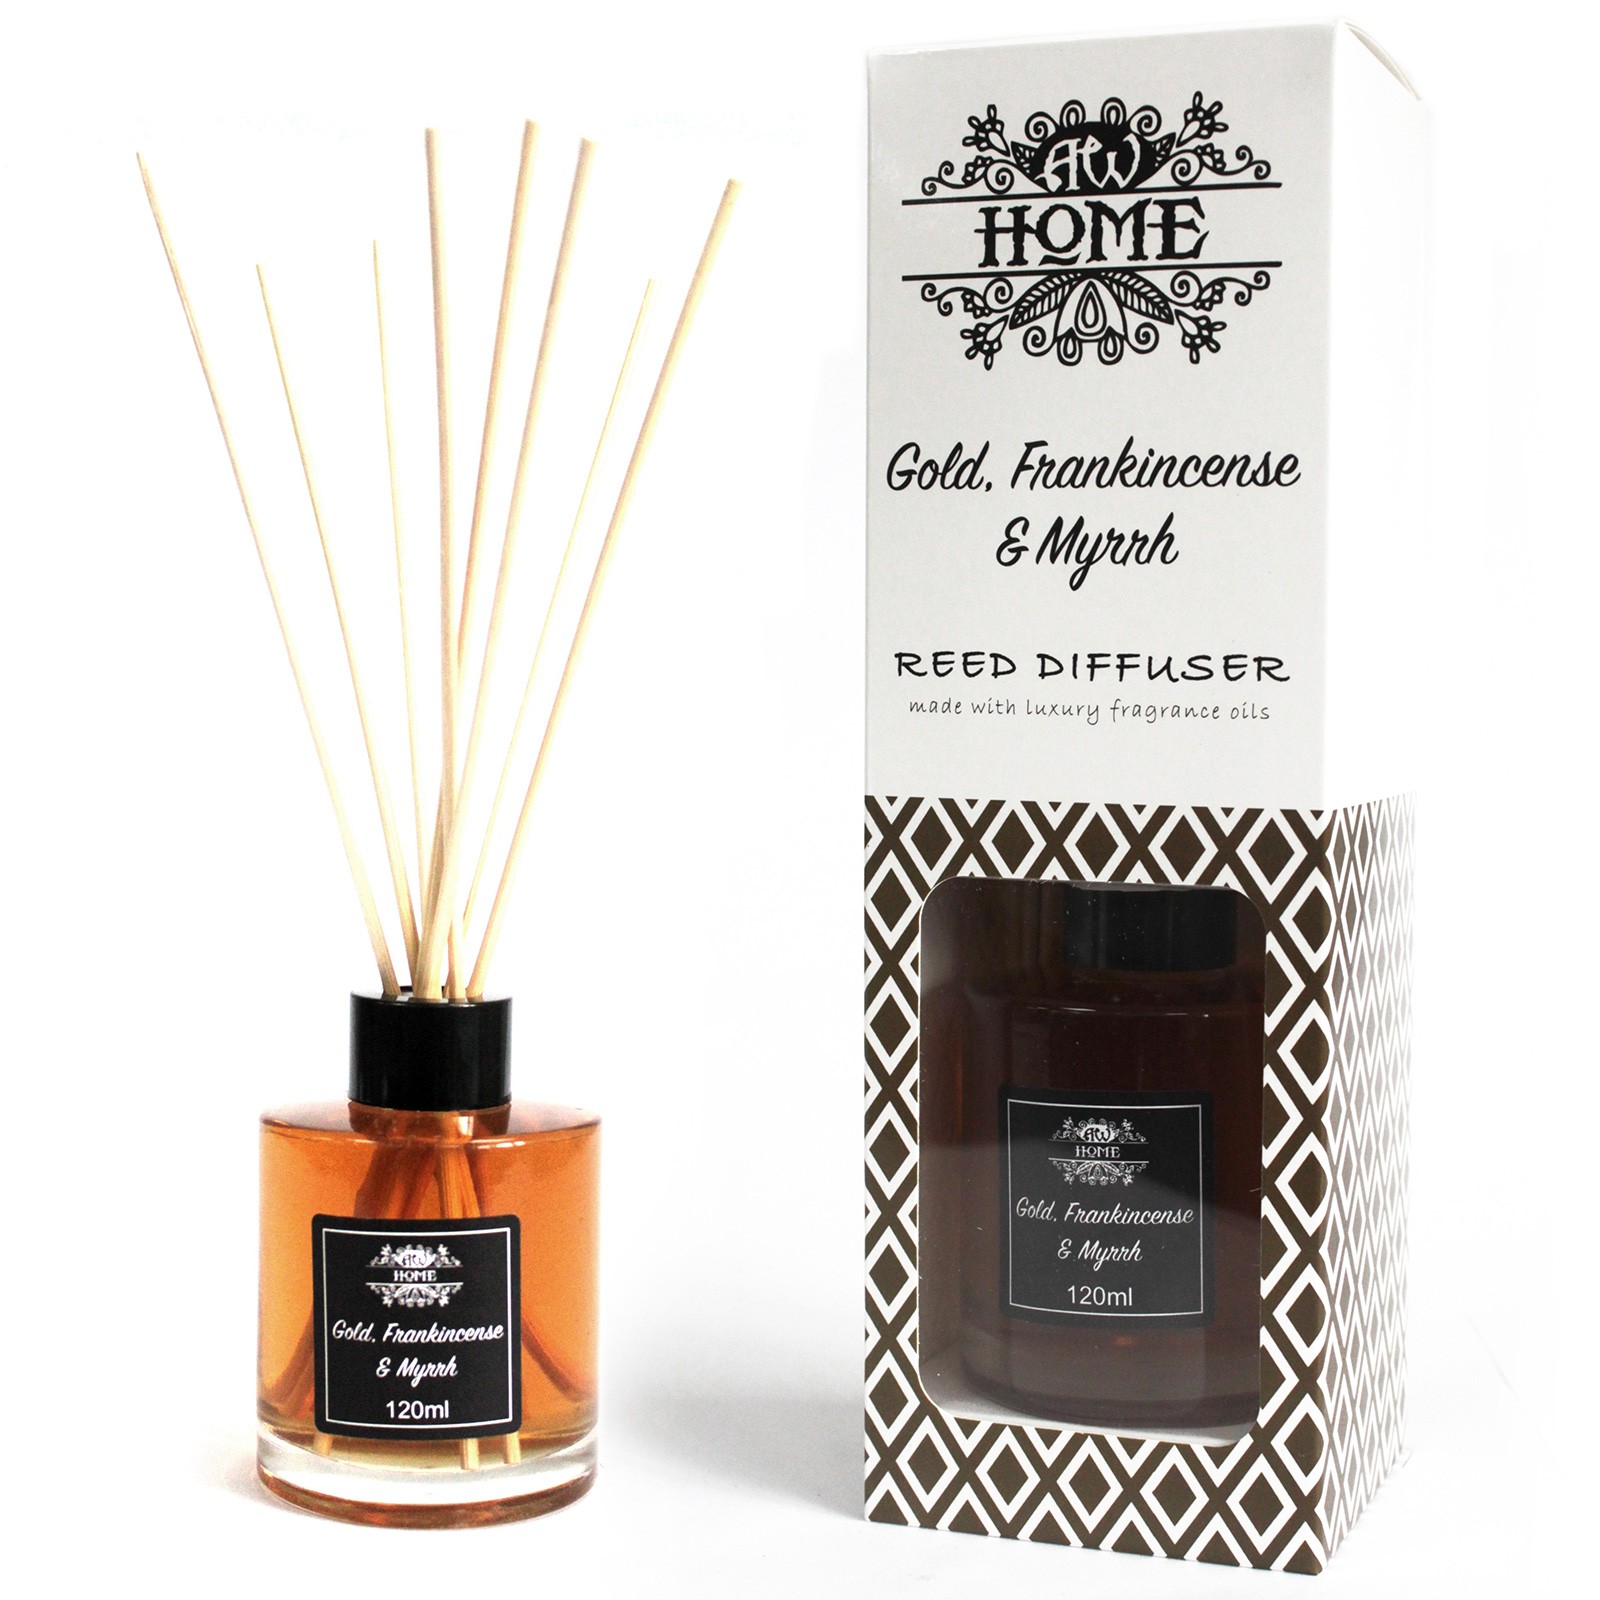 Gold, Frankincense & Myrrh - Home Fragrance Reed Diffuser - 120ml With Reeds